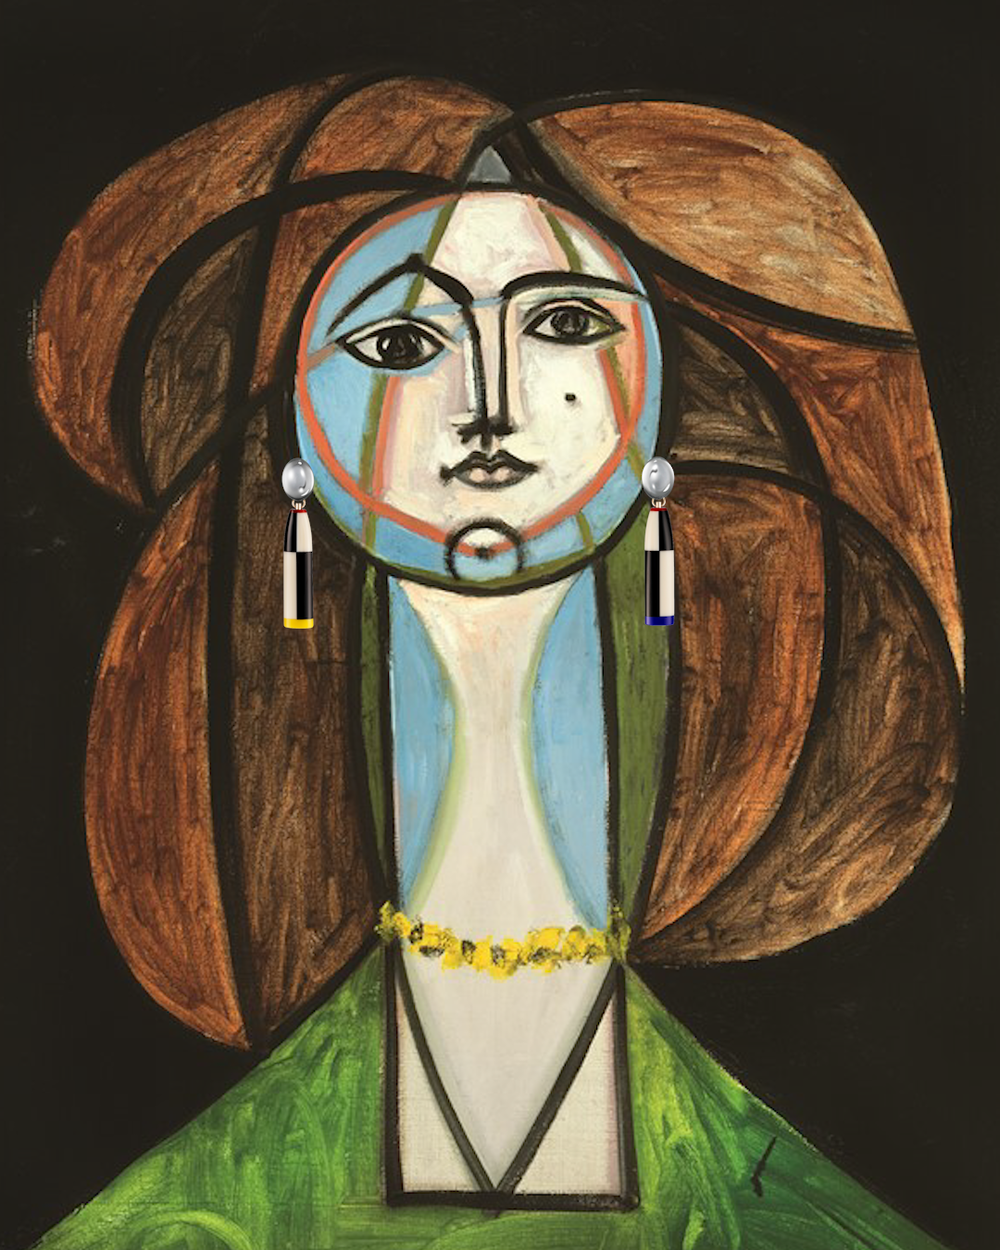 Art-time-travelling-with-Picasso 1946.png